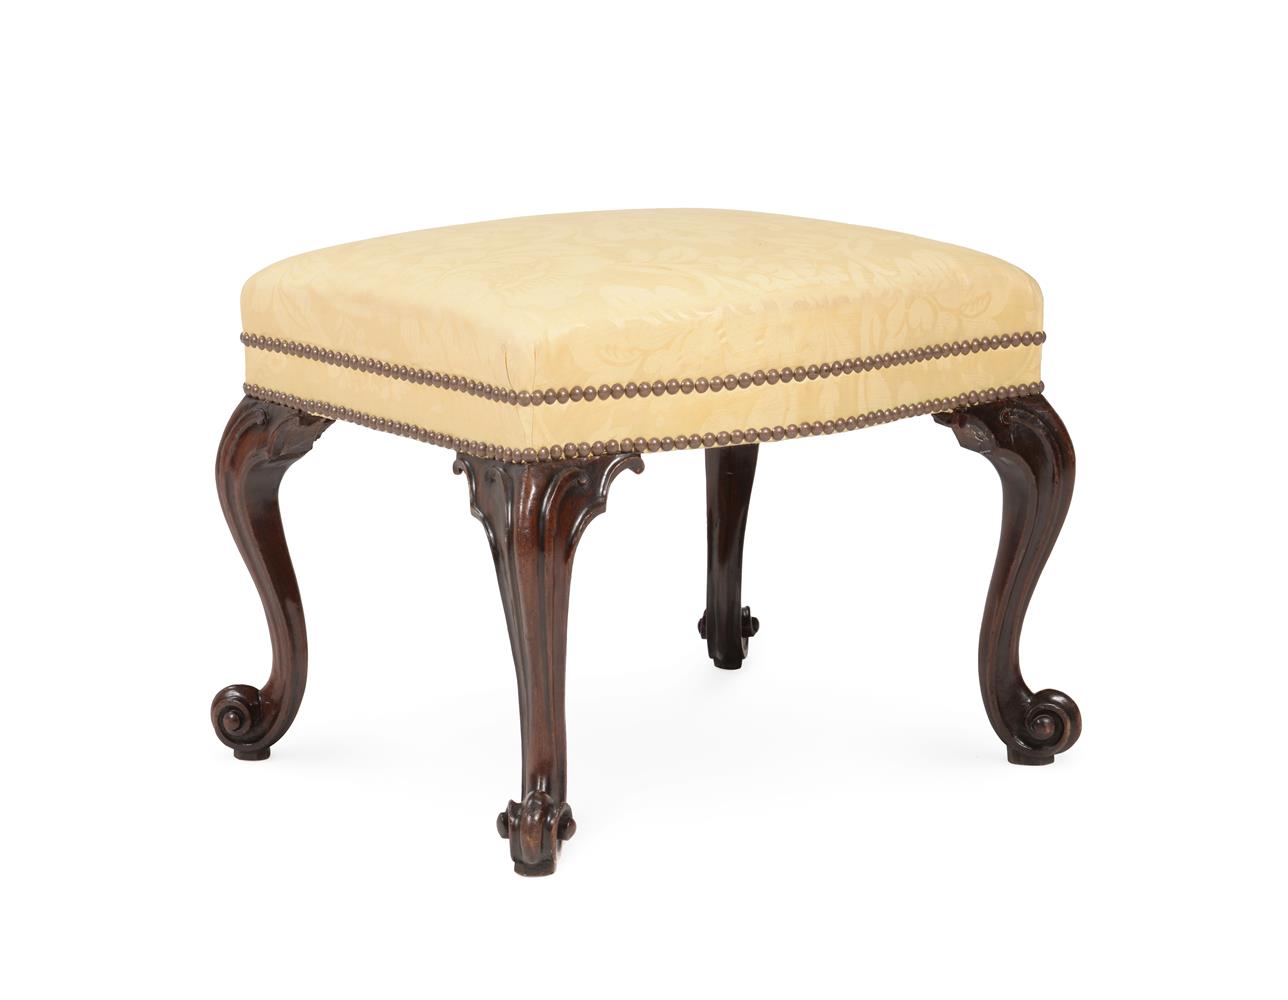 A GEORGE III MAHOGANY AND UPHOLSTERED STOOL, IN THE MANNER OF THOMAS CHIPPENDALE, CIRCA 1770